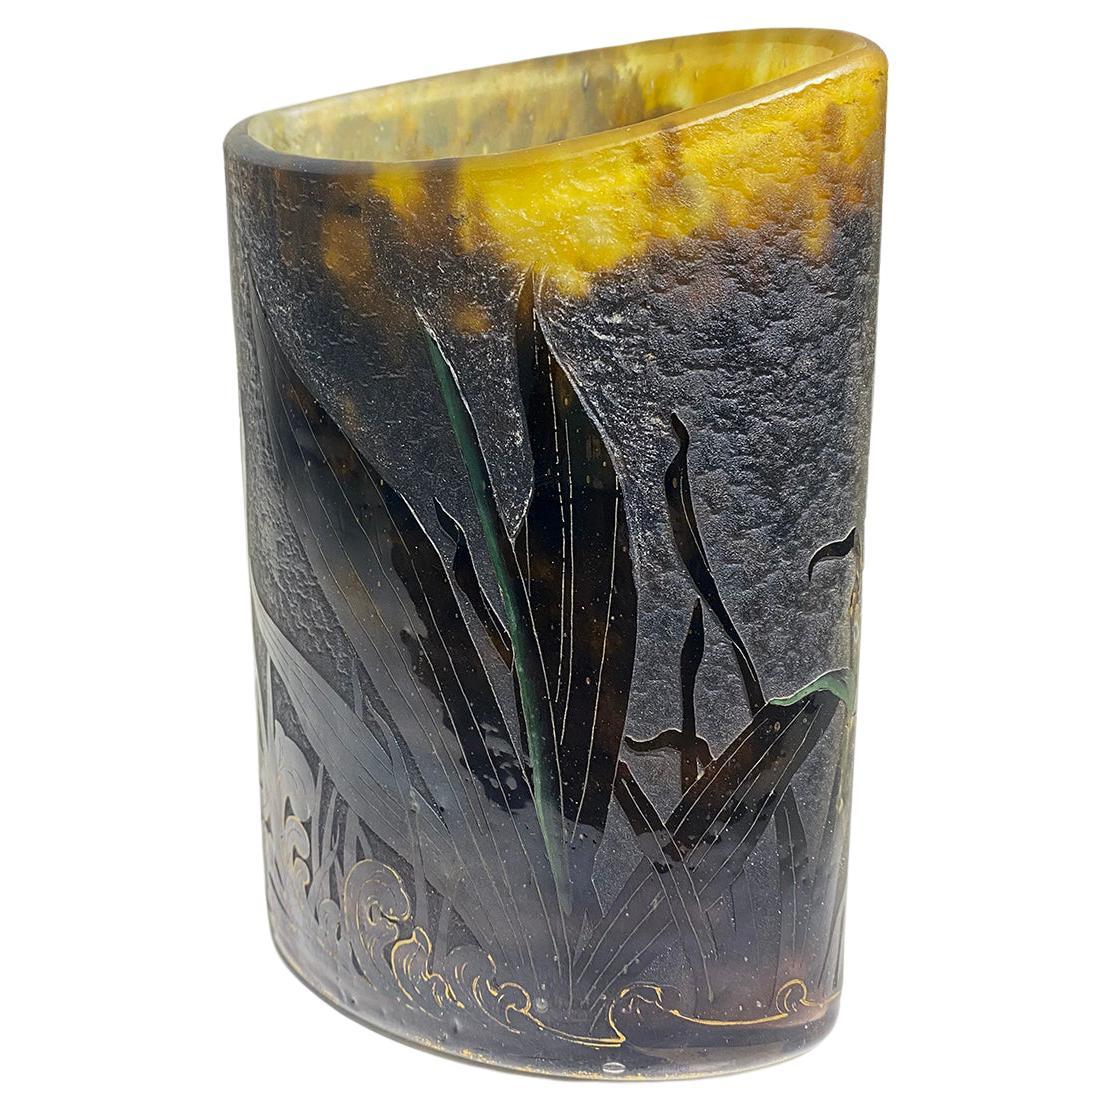 This French Art Nouveau Cameo glass vase by Daum Nancy features leaves with gilded edges and spider web, having a gilded edge of the base and signed in gilt Daum Nancy with Lorraine cross, circa 1900-1910.

The meticulous attention to detail is